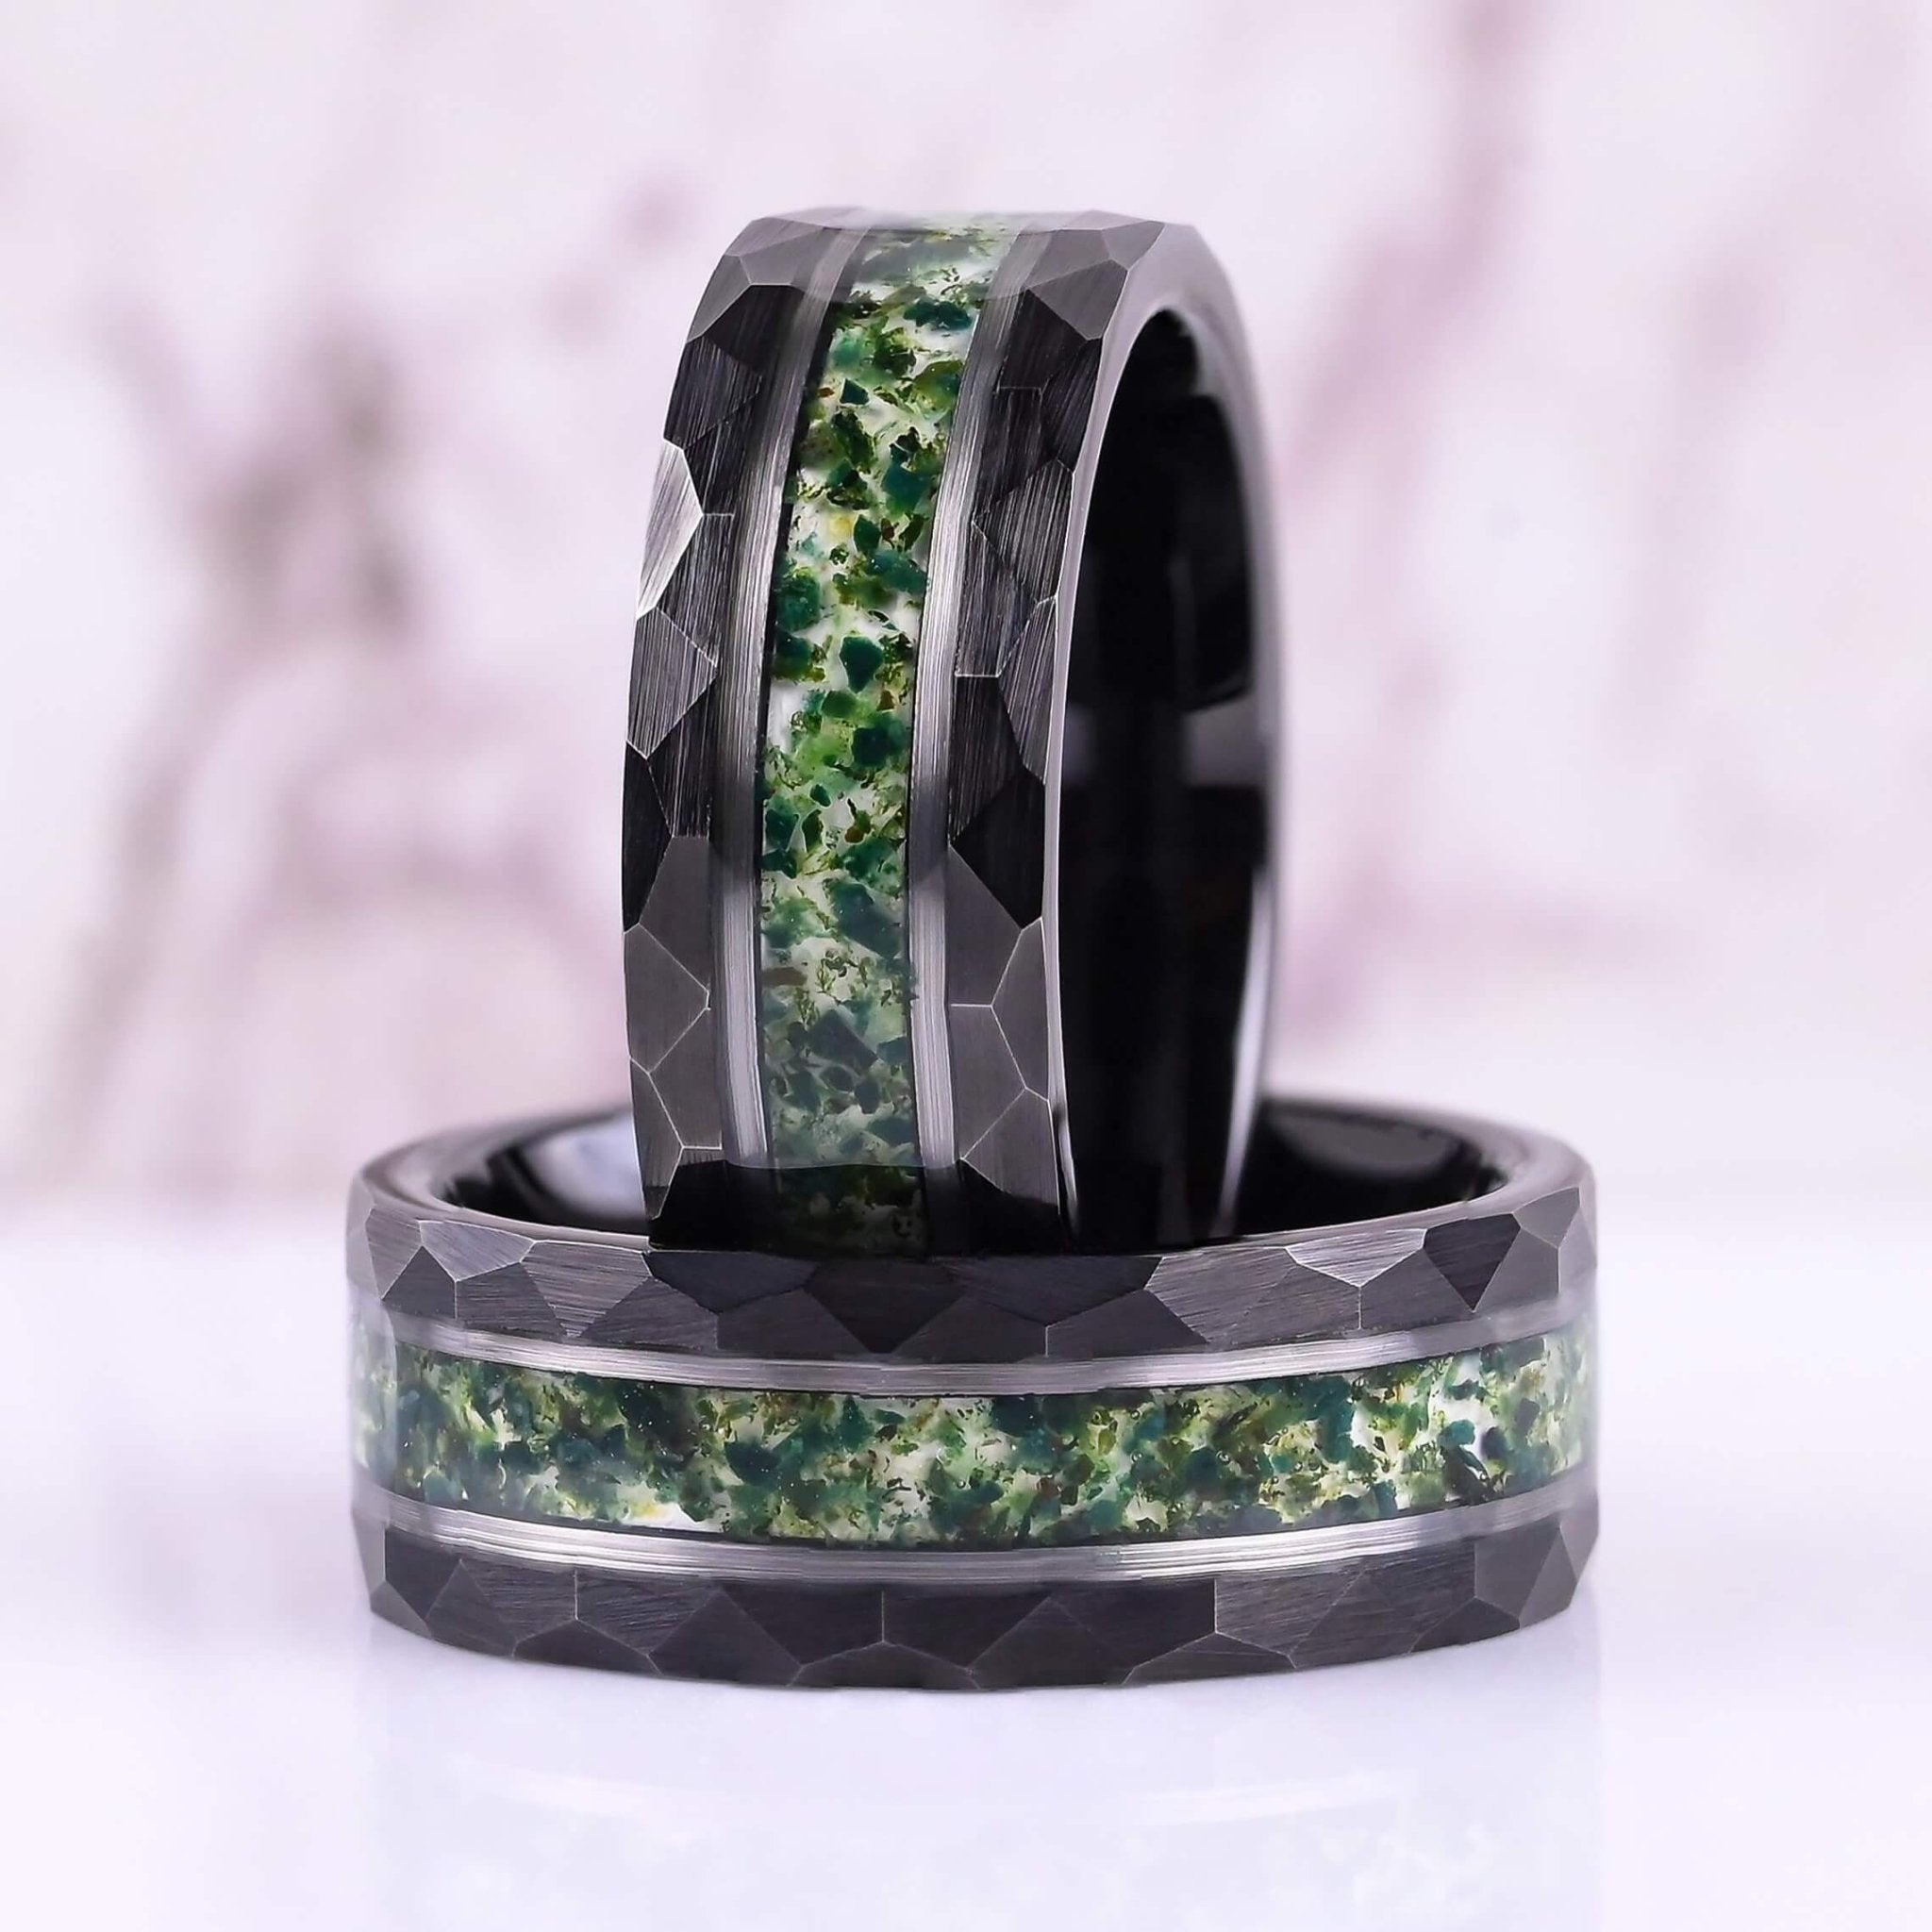 Moss Agate - Couple Ring Set - TUNSGTEN / 925 SILVER Rings - Green Moss Agate Inlay - Wedding Bands - Promise Ring